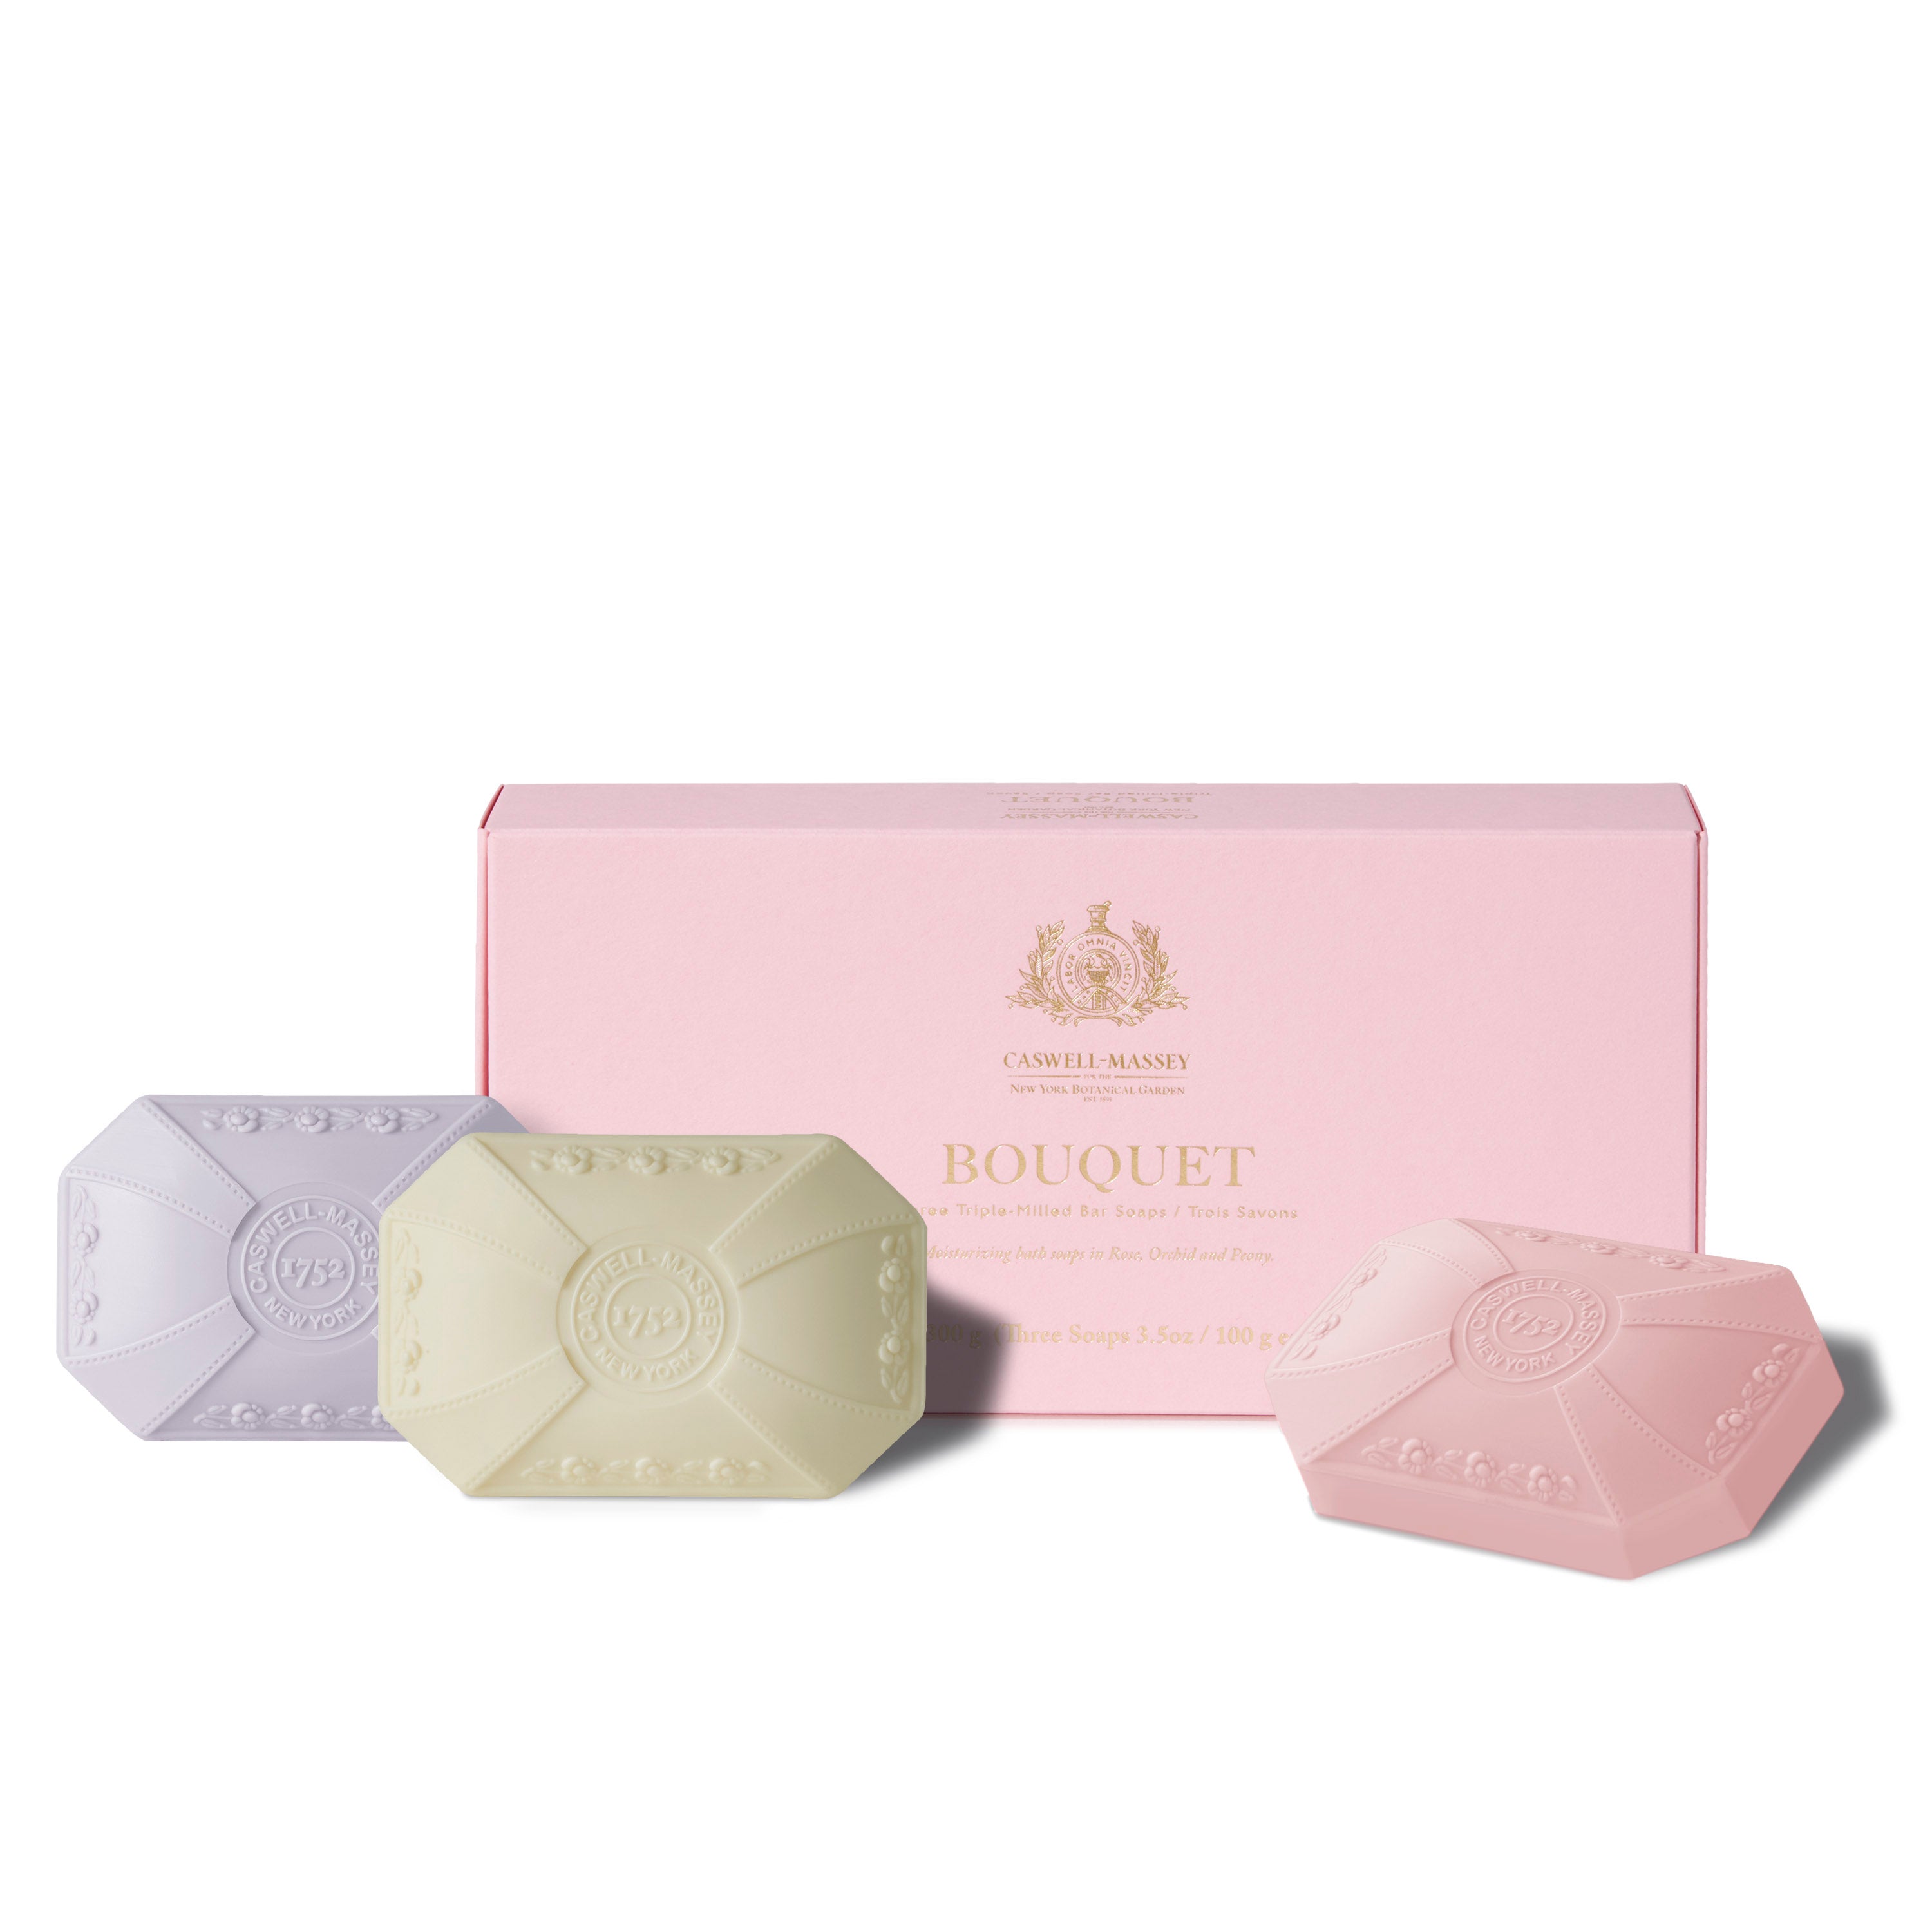 Caswell-Massey Bouquet of Florals 3-Soap Set: Peony, Rose, and Orchid Bath Soaps